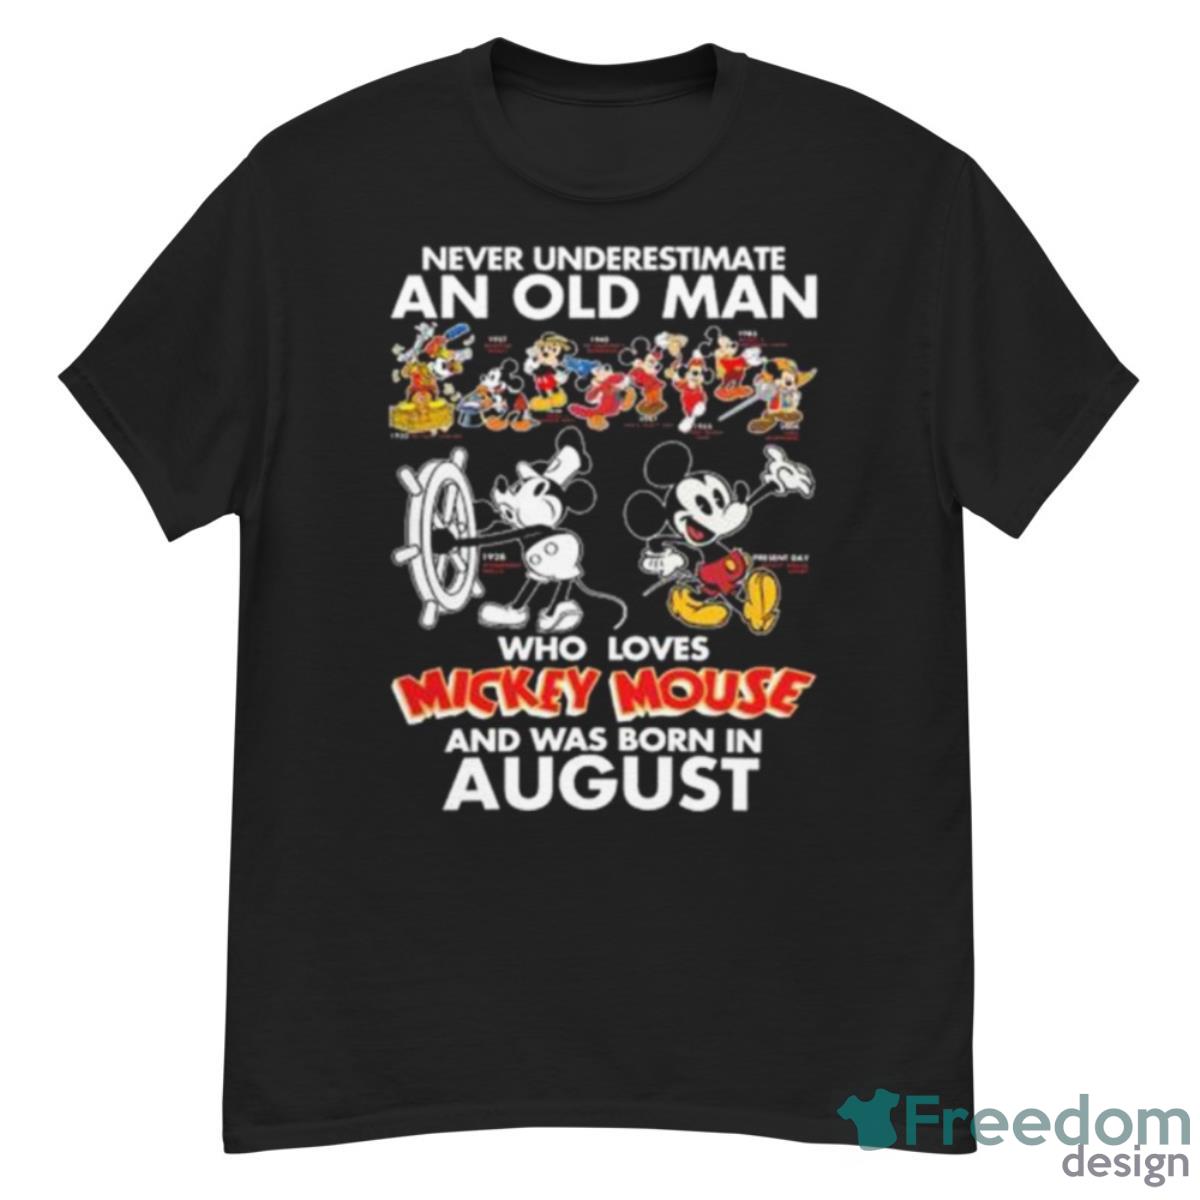 Never Underestimate An Old Man Who Loves Mickey Mouse And Was Born In August Shirt - G500 Men’s Classic T-Shirt